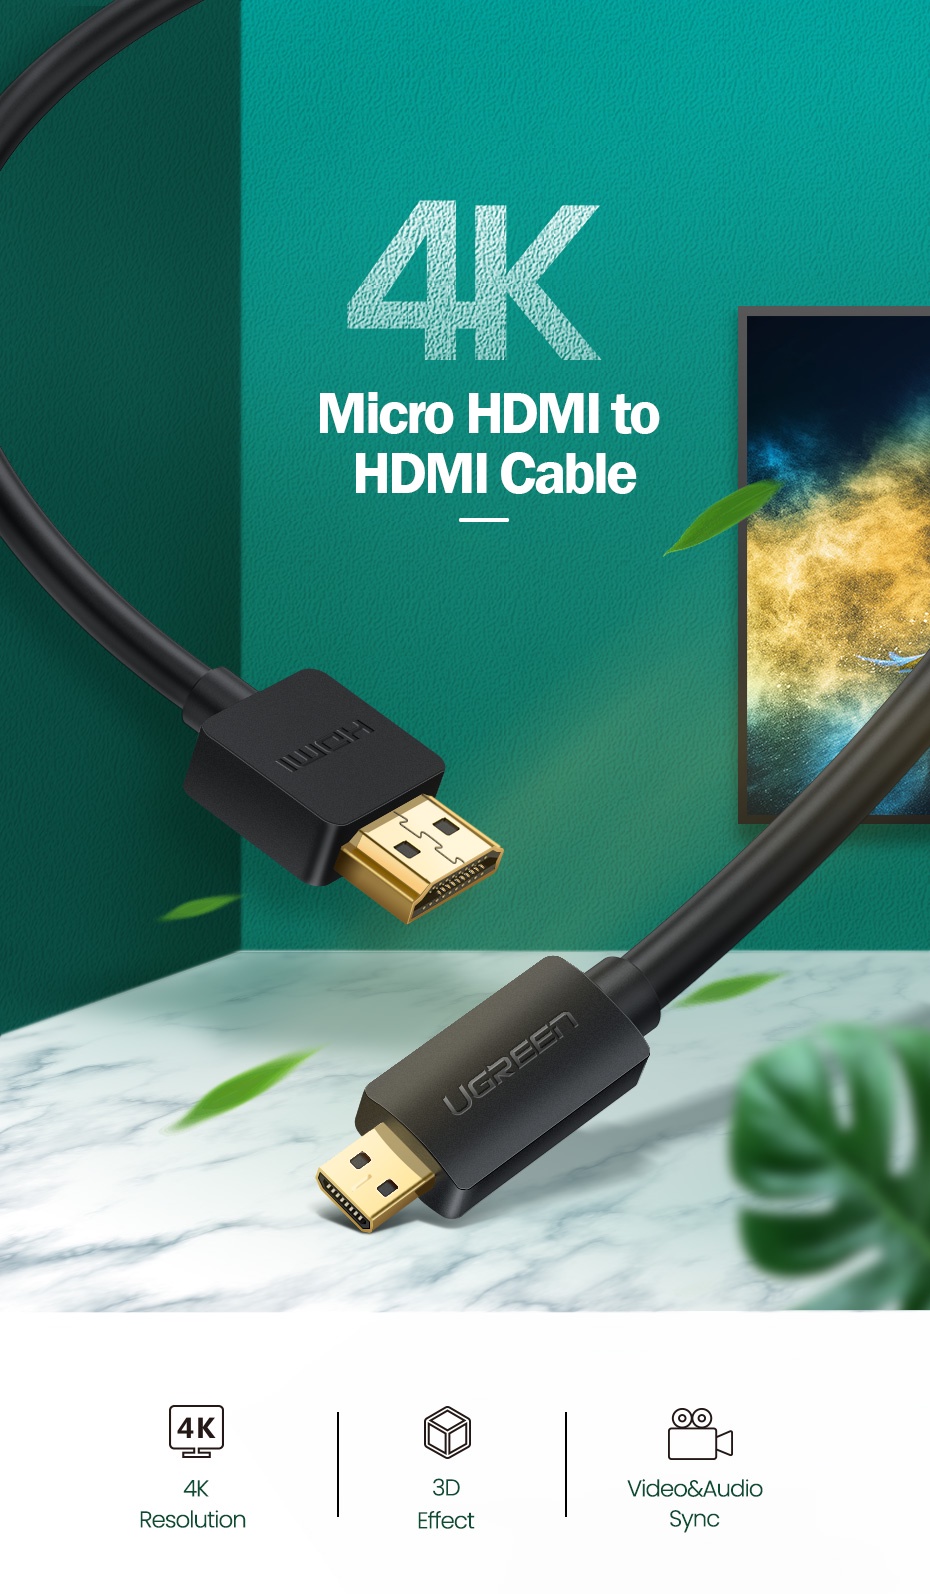 Cat 7 Ethernet Cable - UGREEN Micro HDMI to HDMI 4K Cable 3D Adapter 1M - High Quality Video and Audio Transfer - SHOPEE MALL | Sri Lanka